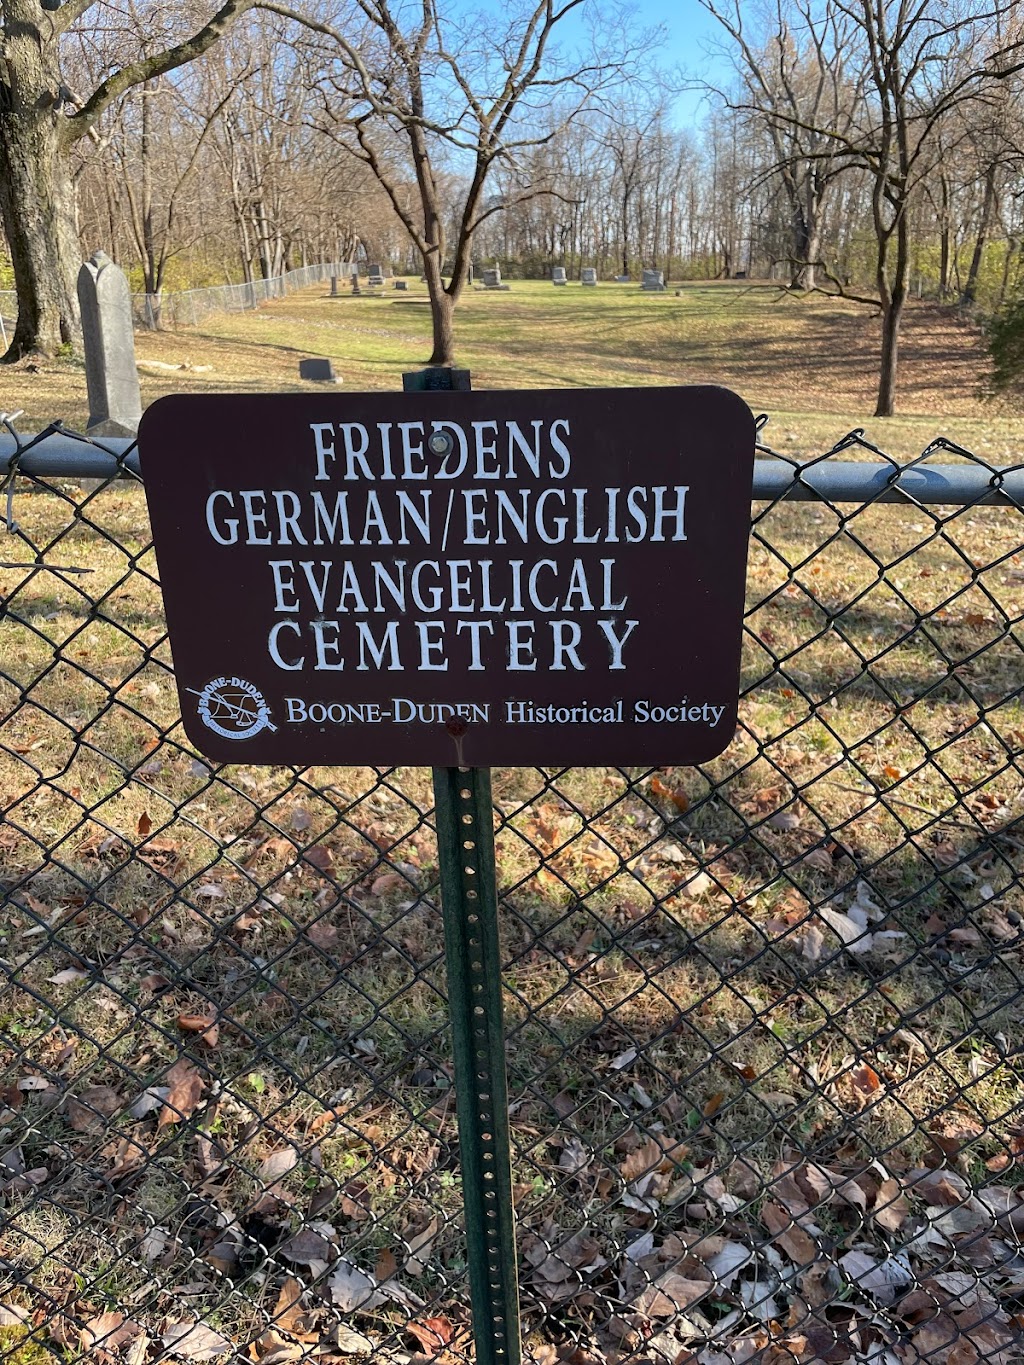 Friedens German English Evangelical Cemetery | St Charles, MO 63304, USA | Phone: (636) 239-3988